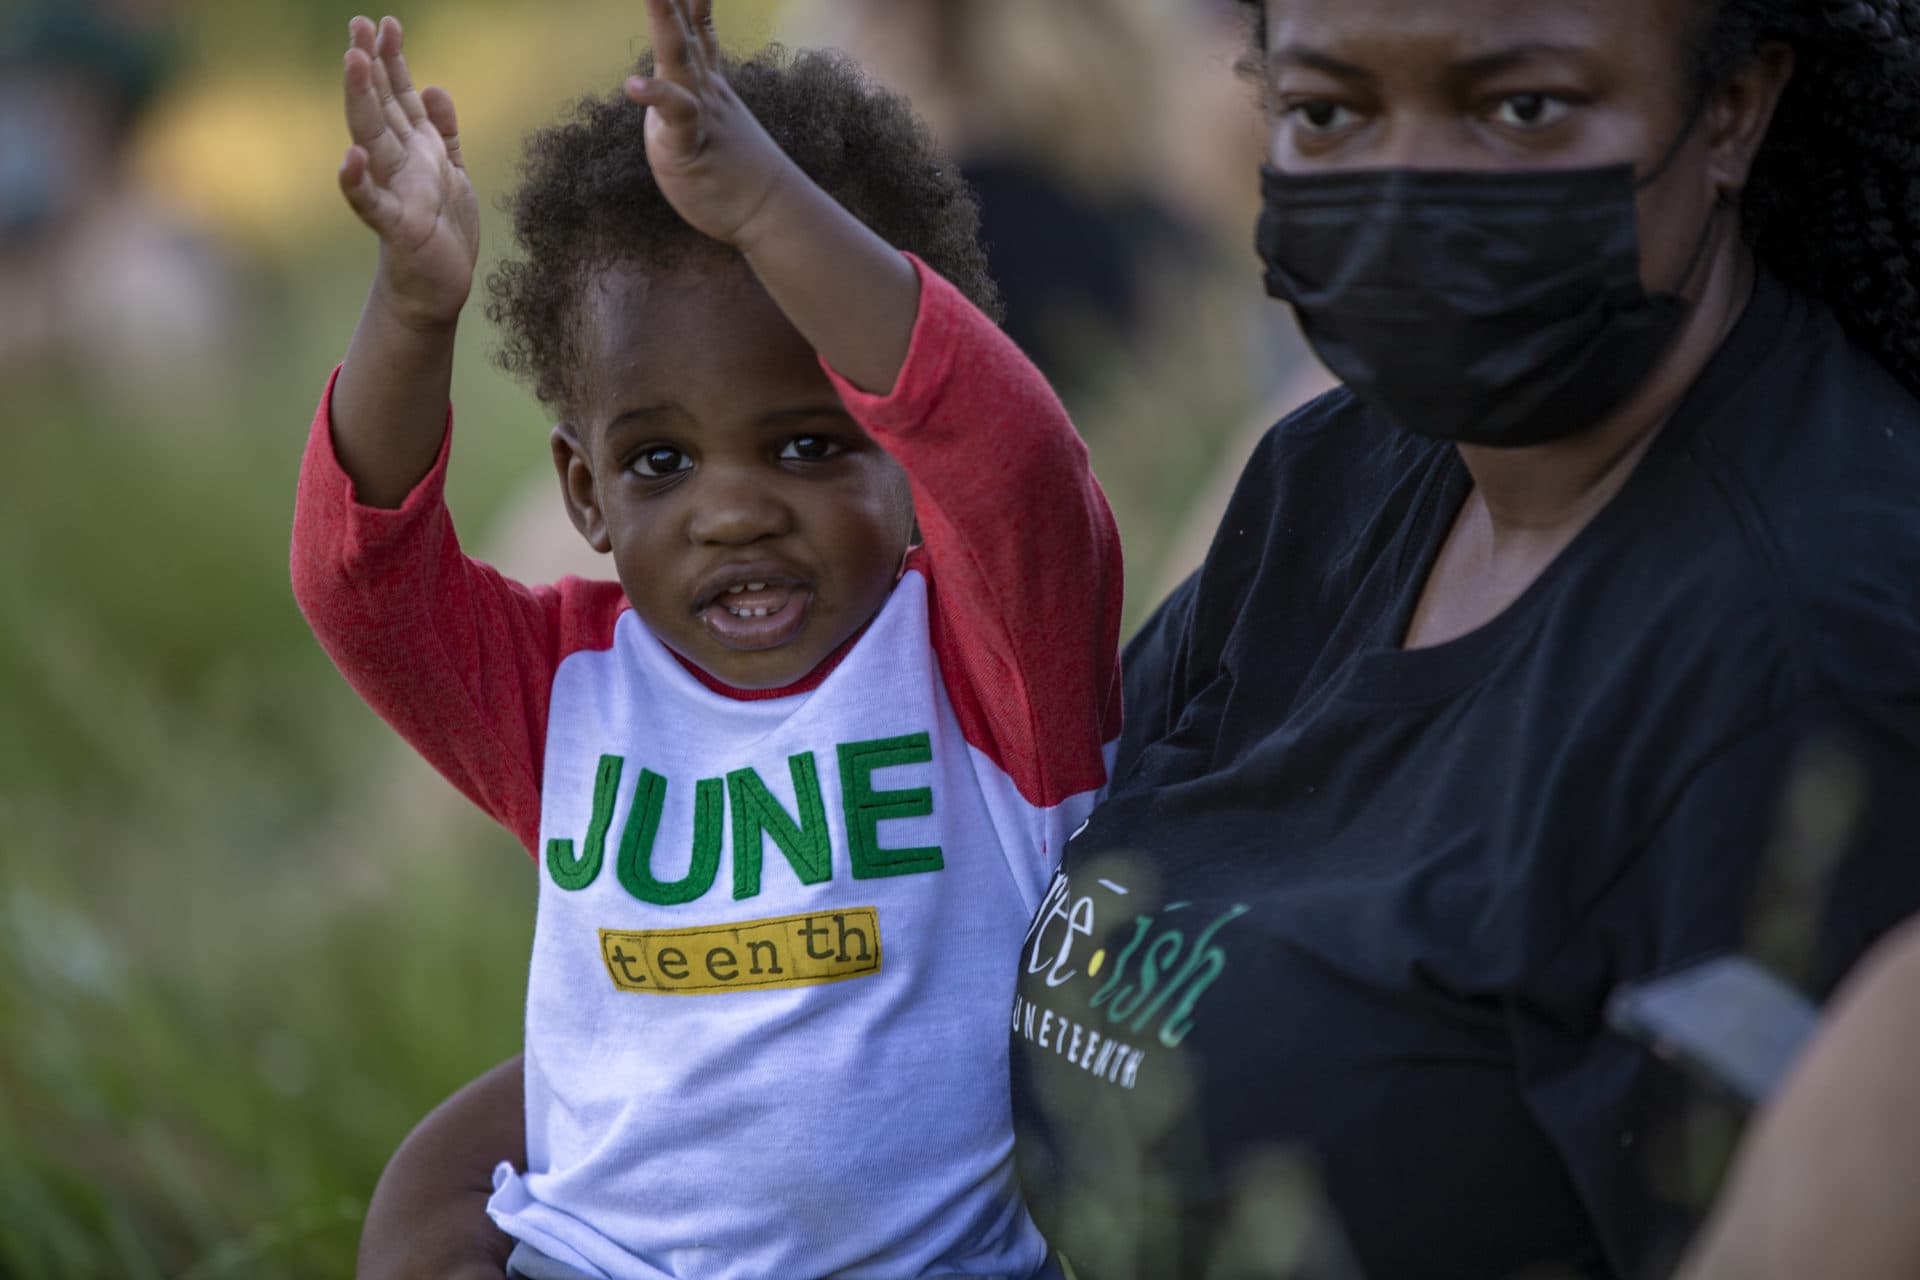 A young boy wearing a Juneteeth shirt applauds with the rest of the crowd during the "Funk the Police" rally at Ronan Park in Dorchester. (Jesse Costa/WBUR)